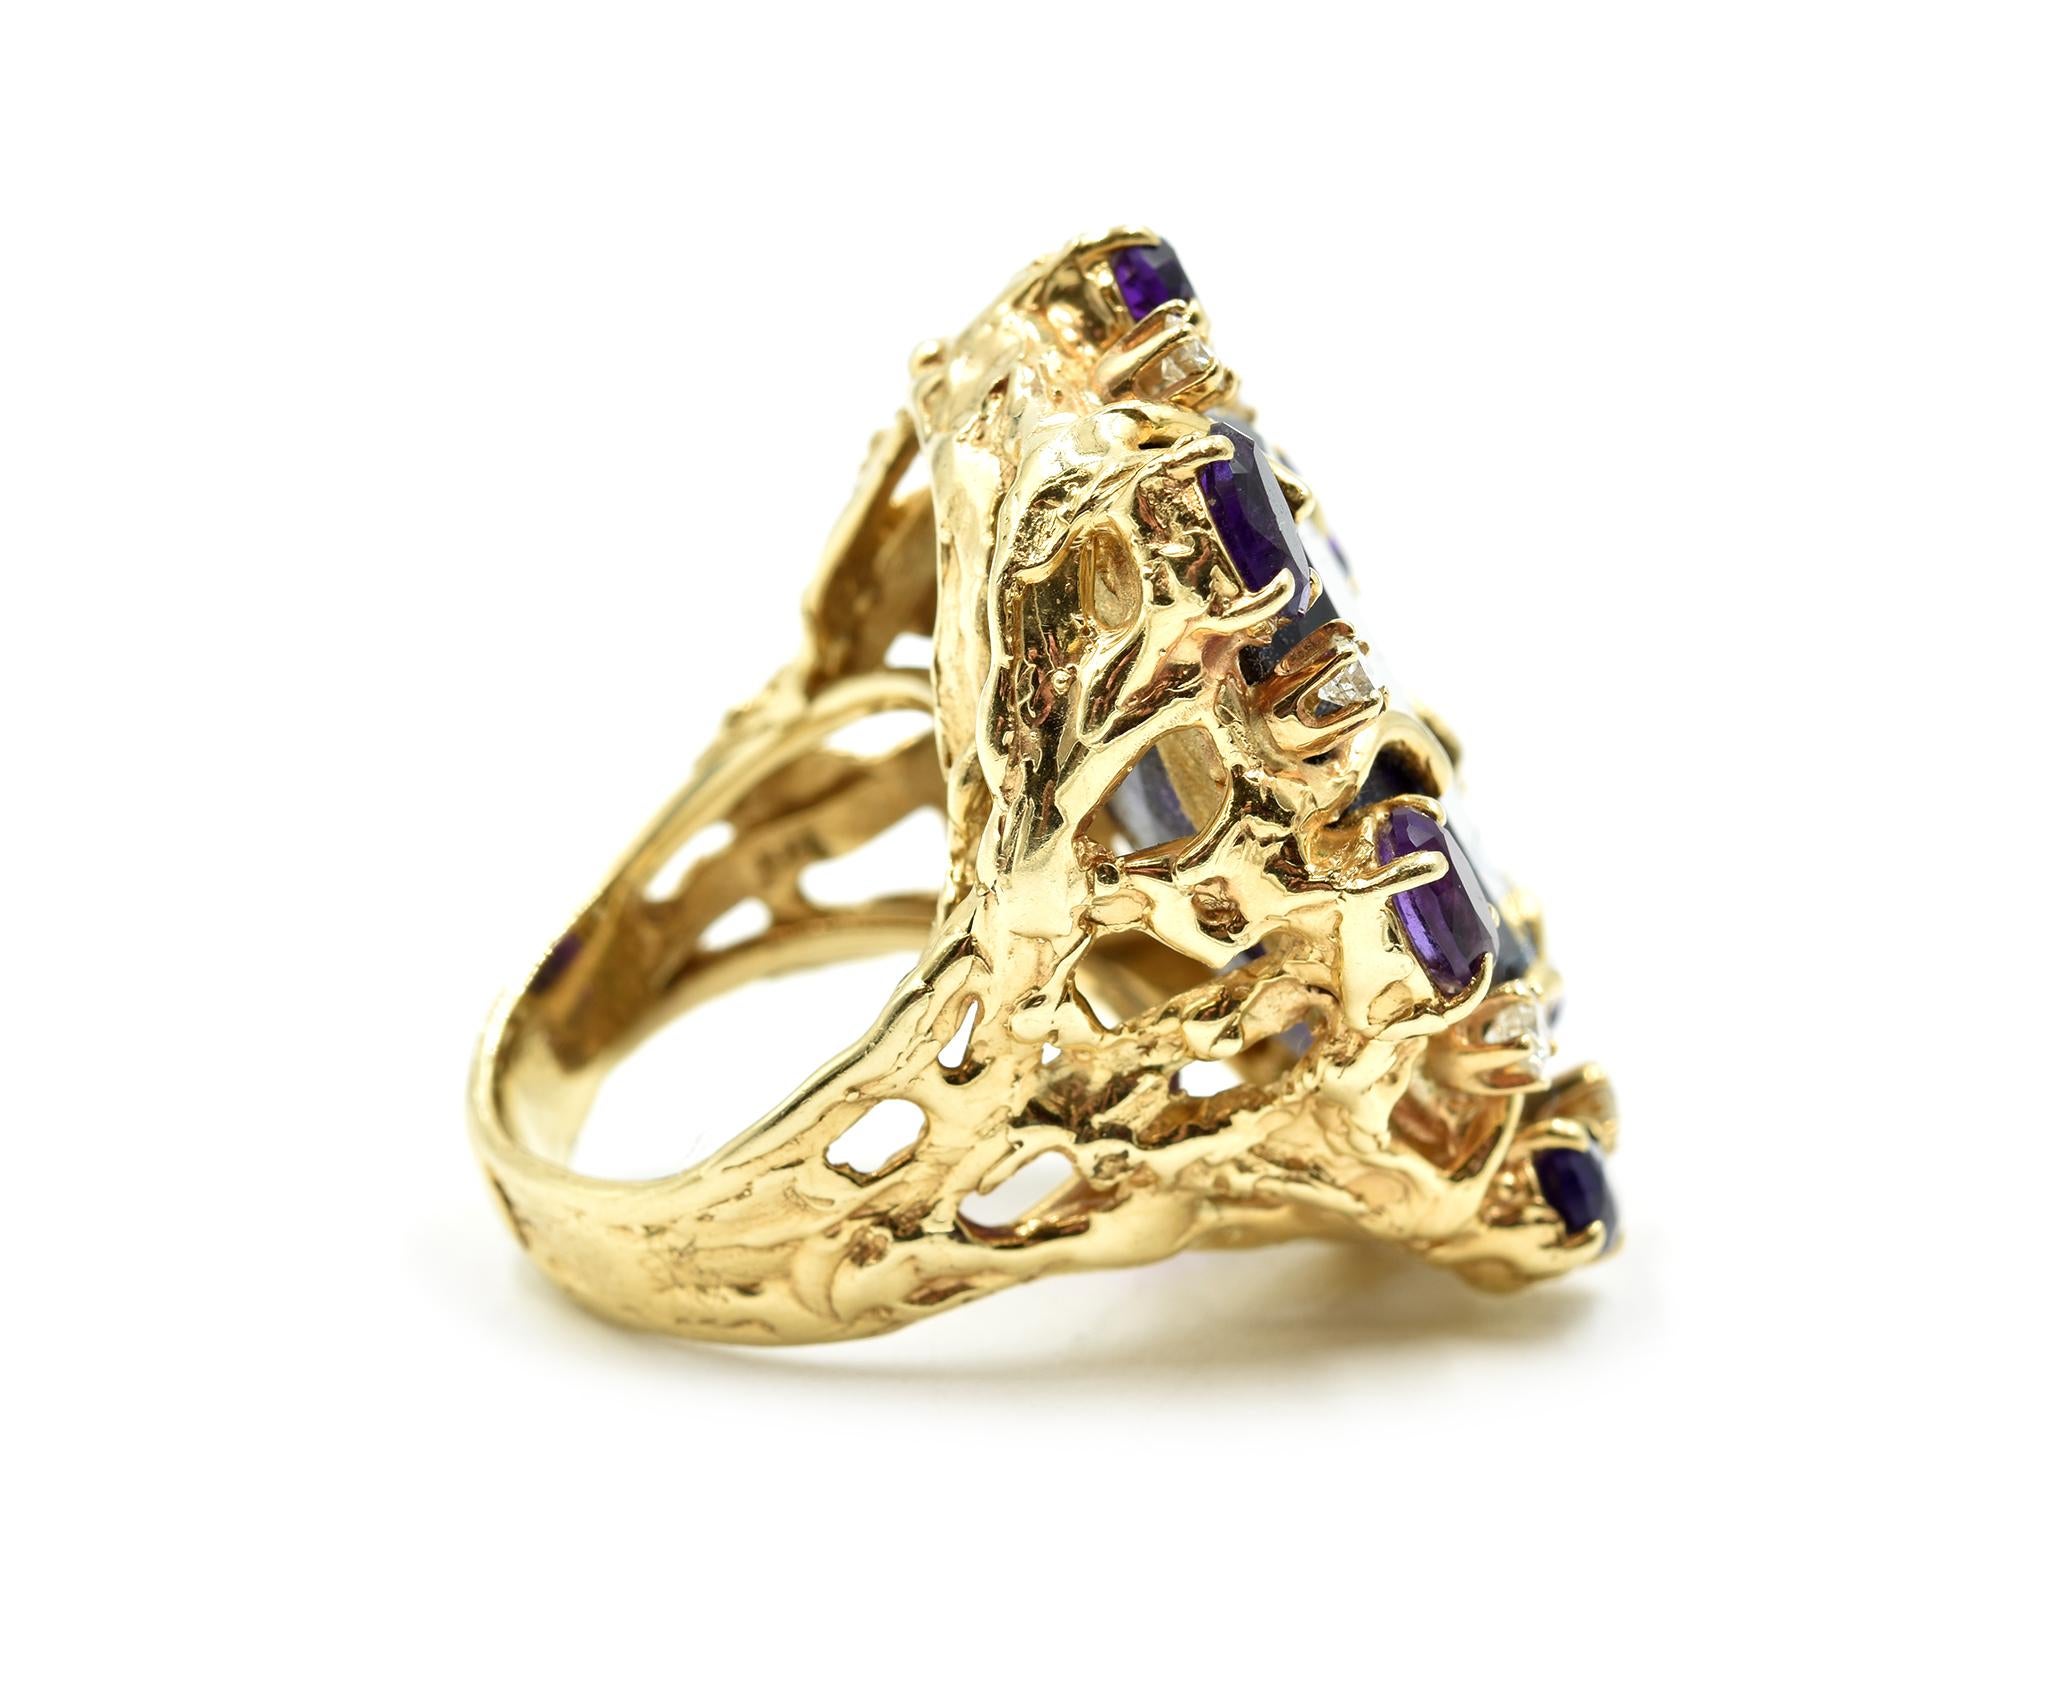 Designer: custom design
Material: 14k yellow gold
Amethyst: cushion cut 25.00 carat amethyst gemstone
Diamonds: six round brilliant cut diamonds = 0.62 carat total weight
Ring Size: 6 ¾ (please allow two additional shipping days for sizing